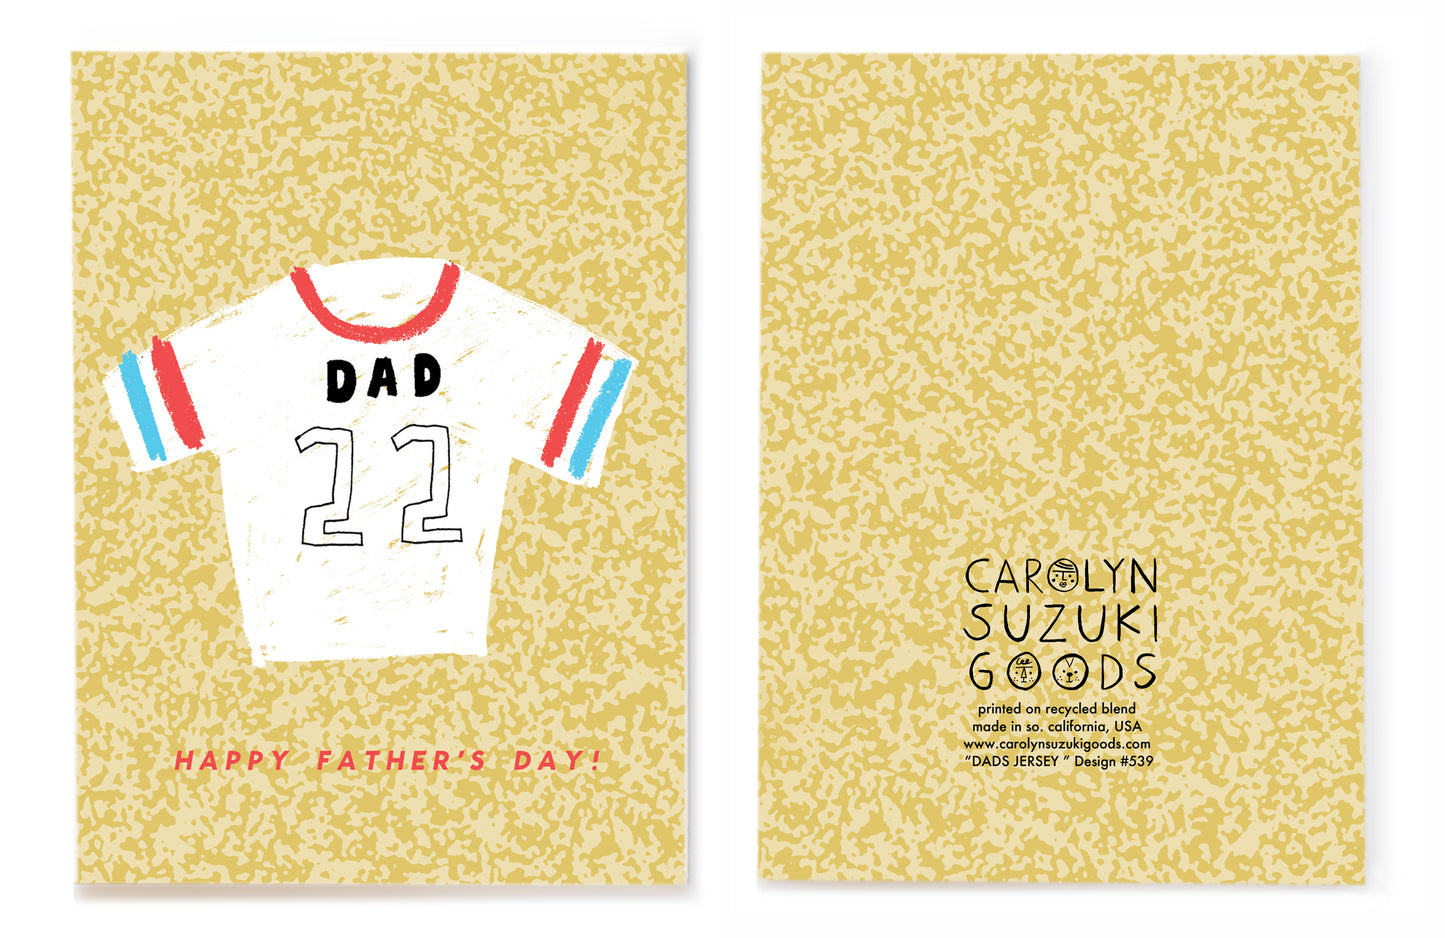 DAD'S JERSEY - Father's Day Card